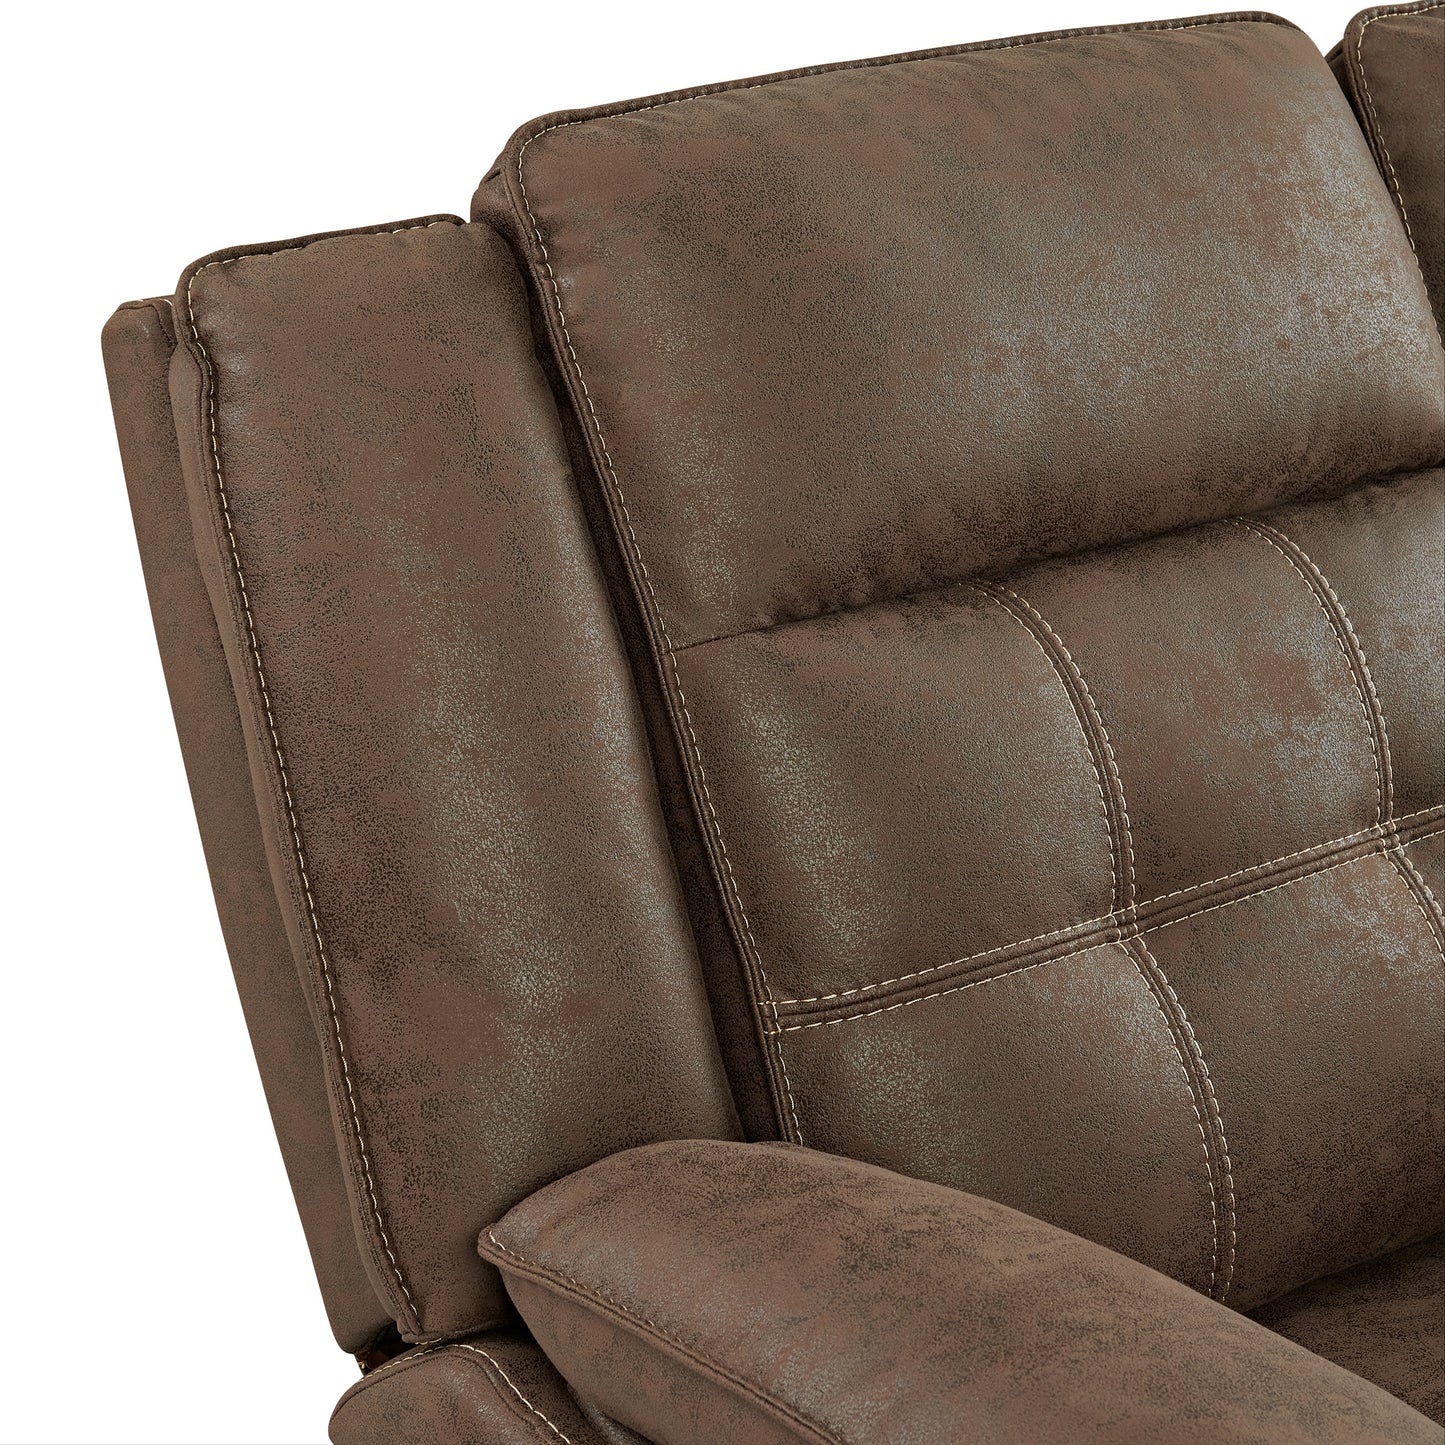 Lesley Transitional Manual Motion Recliner, Brown